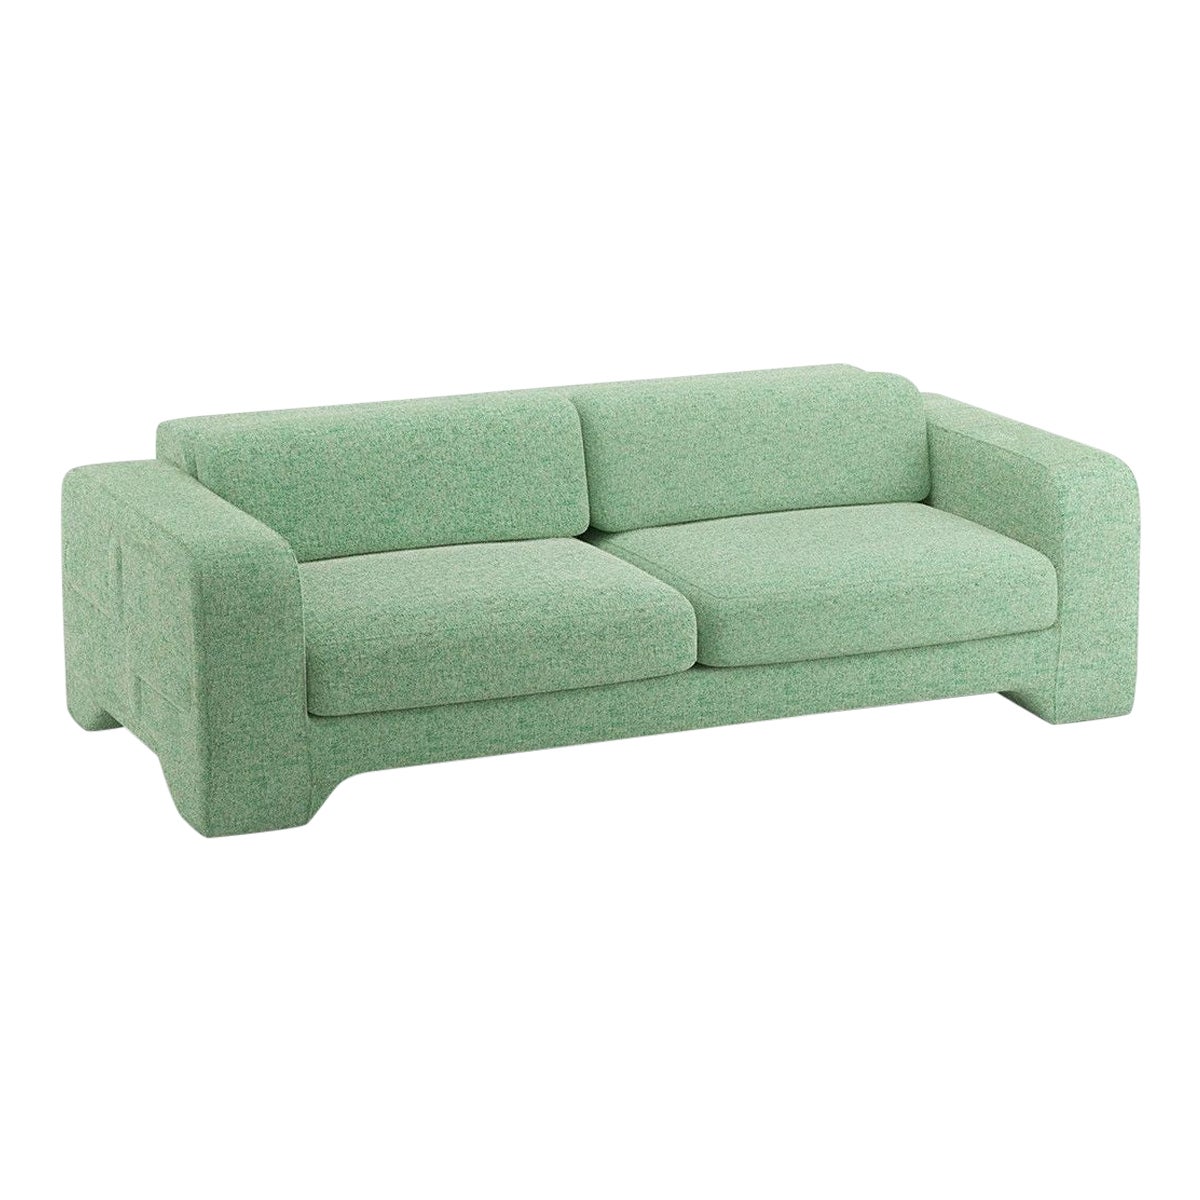 Popus Editions Giovanna 4 Seater Sofa in Emerald London Linen Fabric For Sale